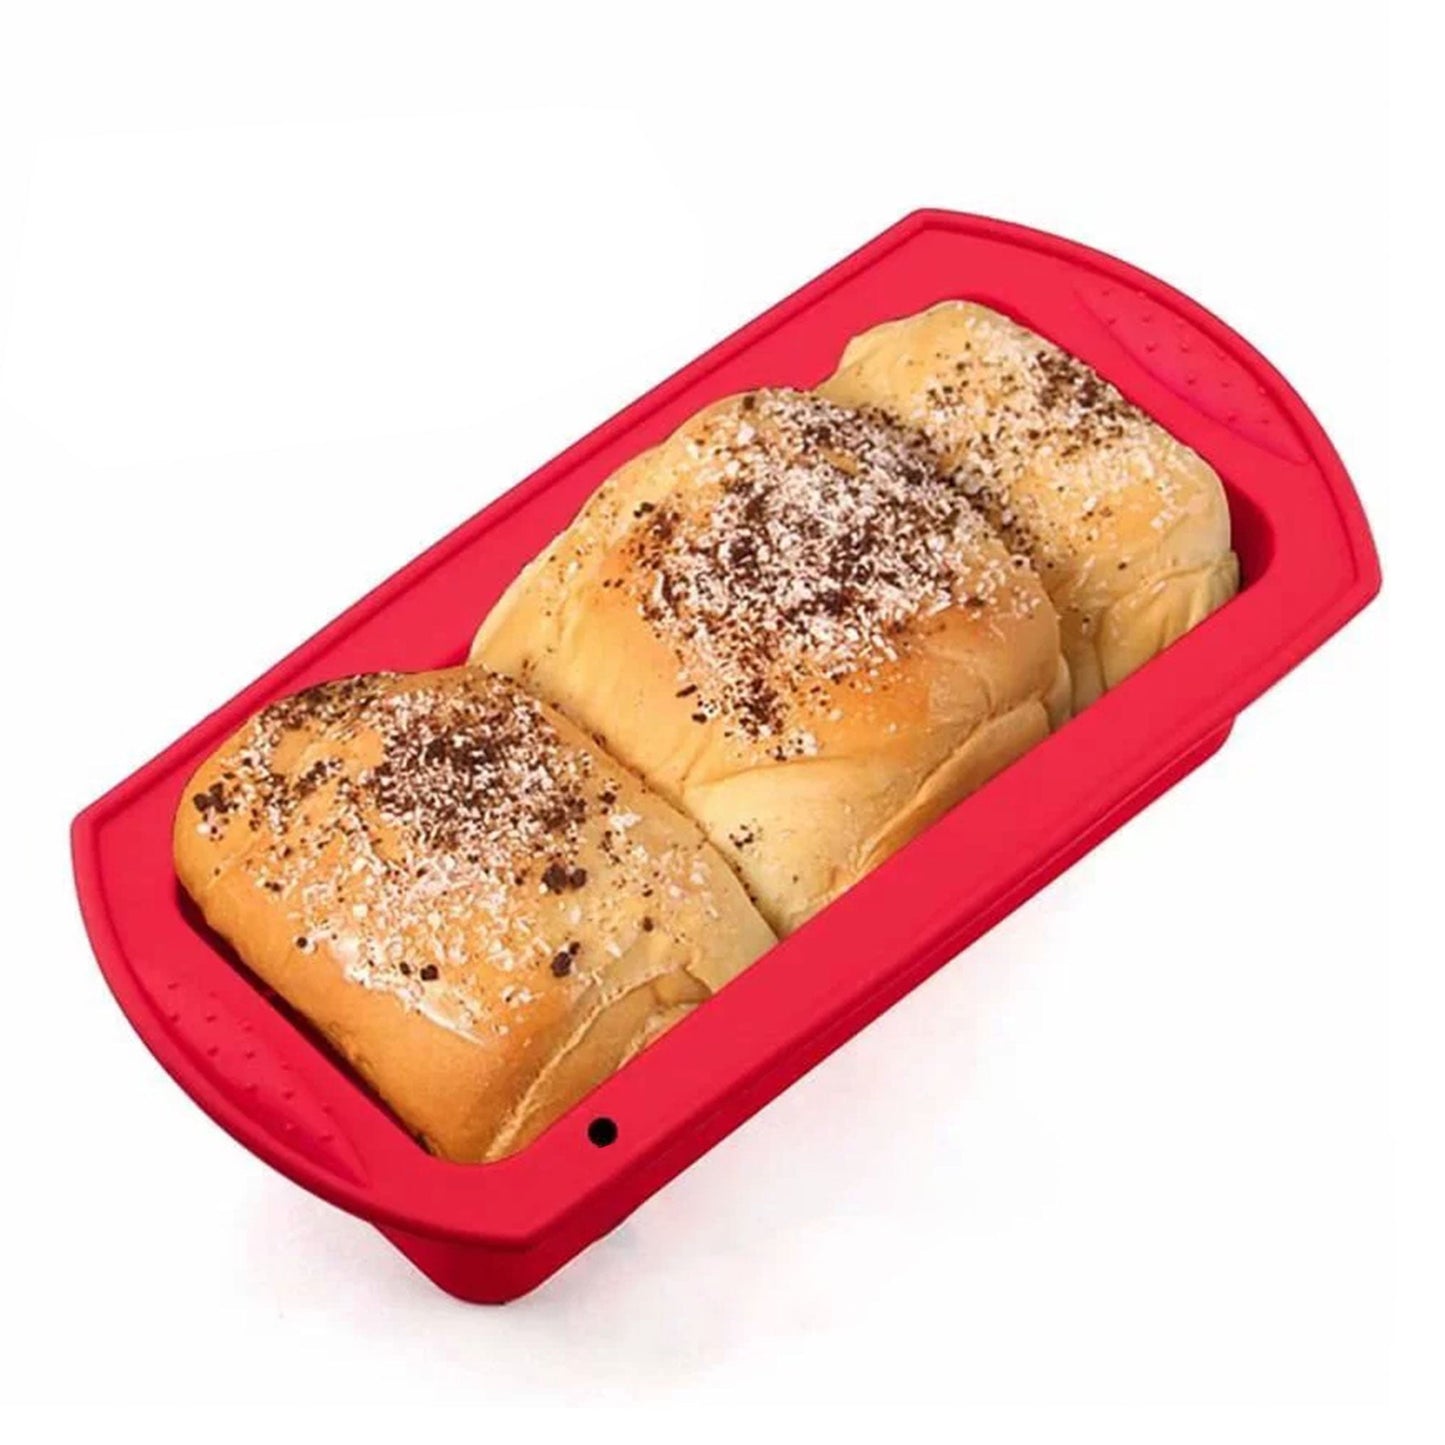 Loaf Silicone Baking Mold 8 Inch